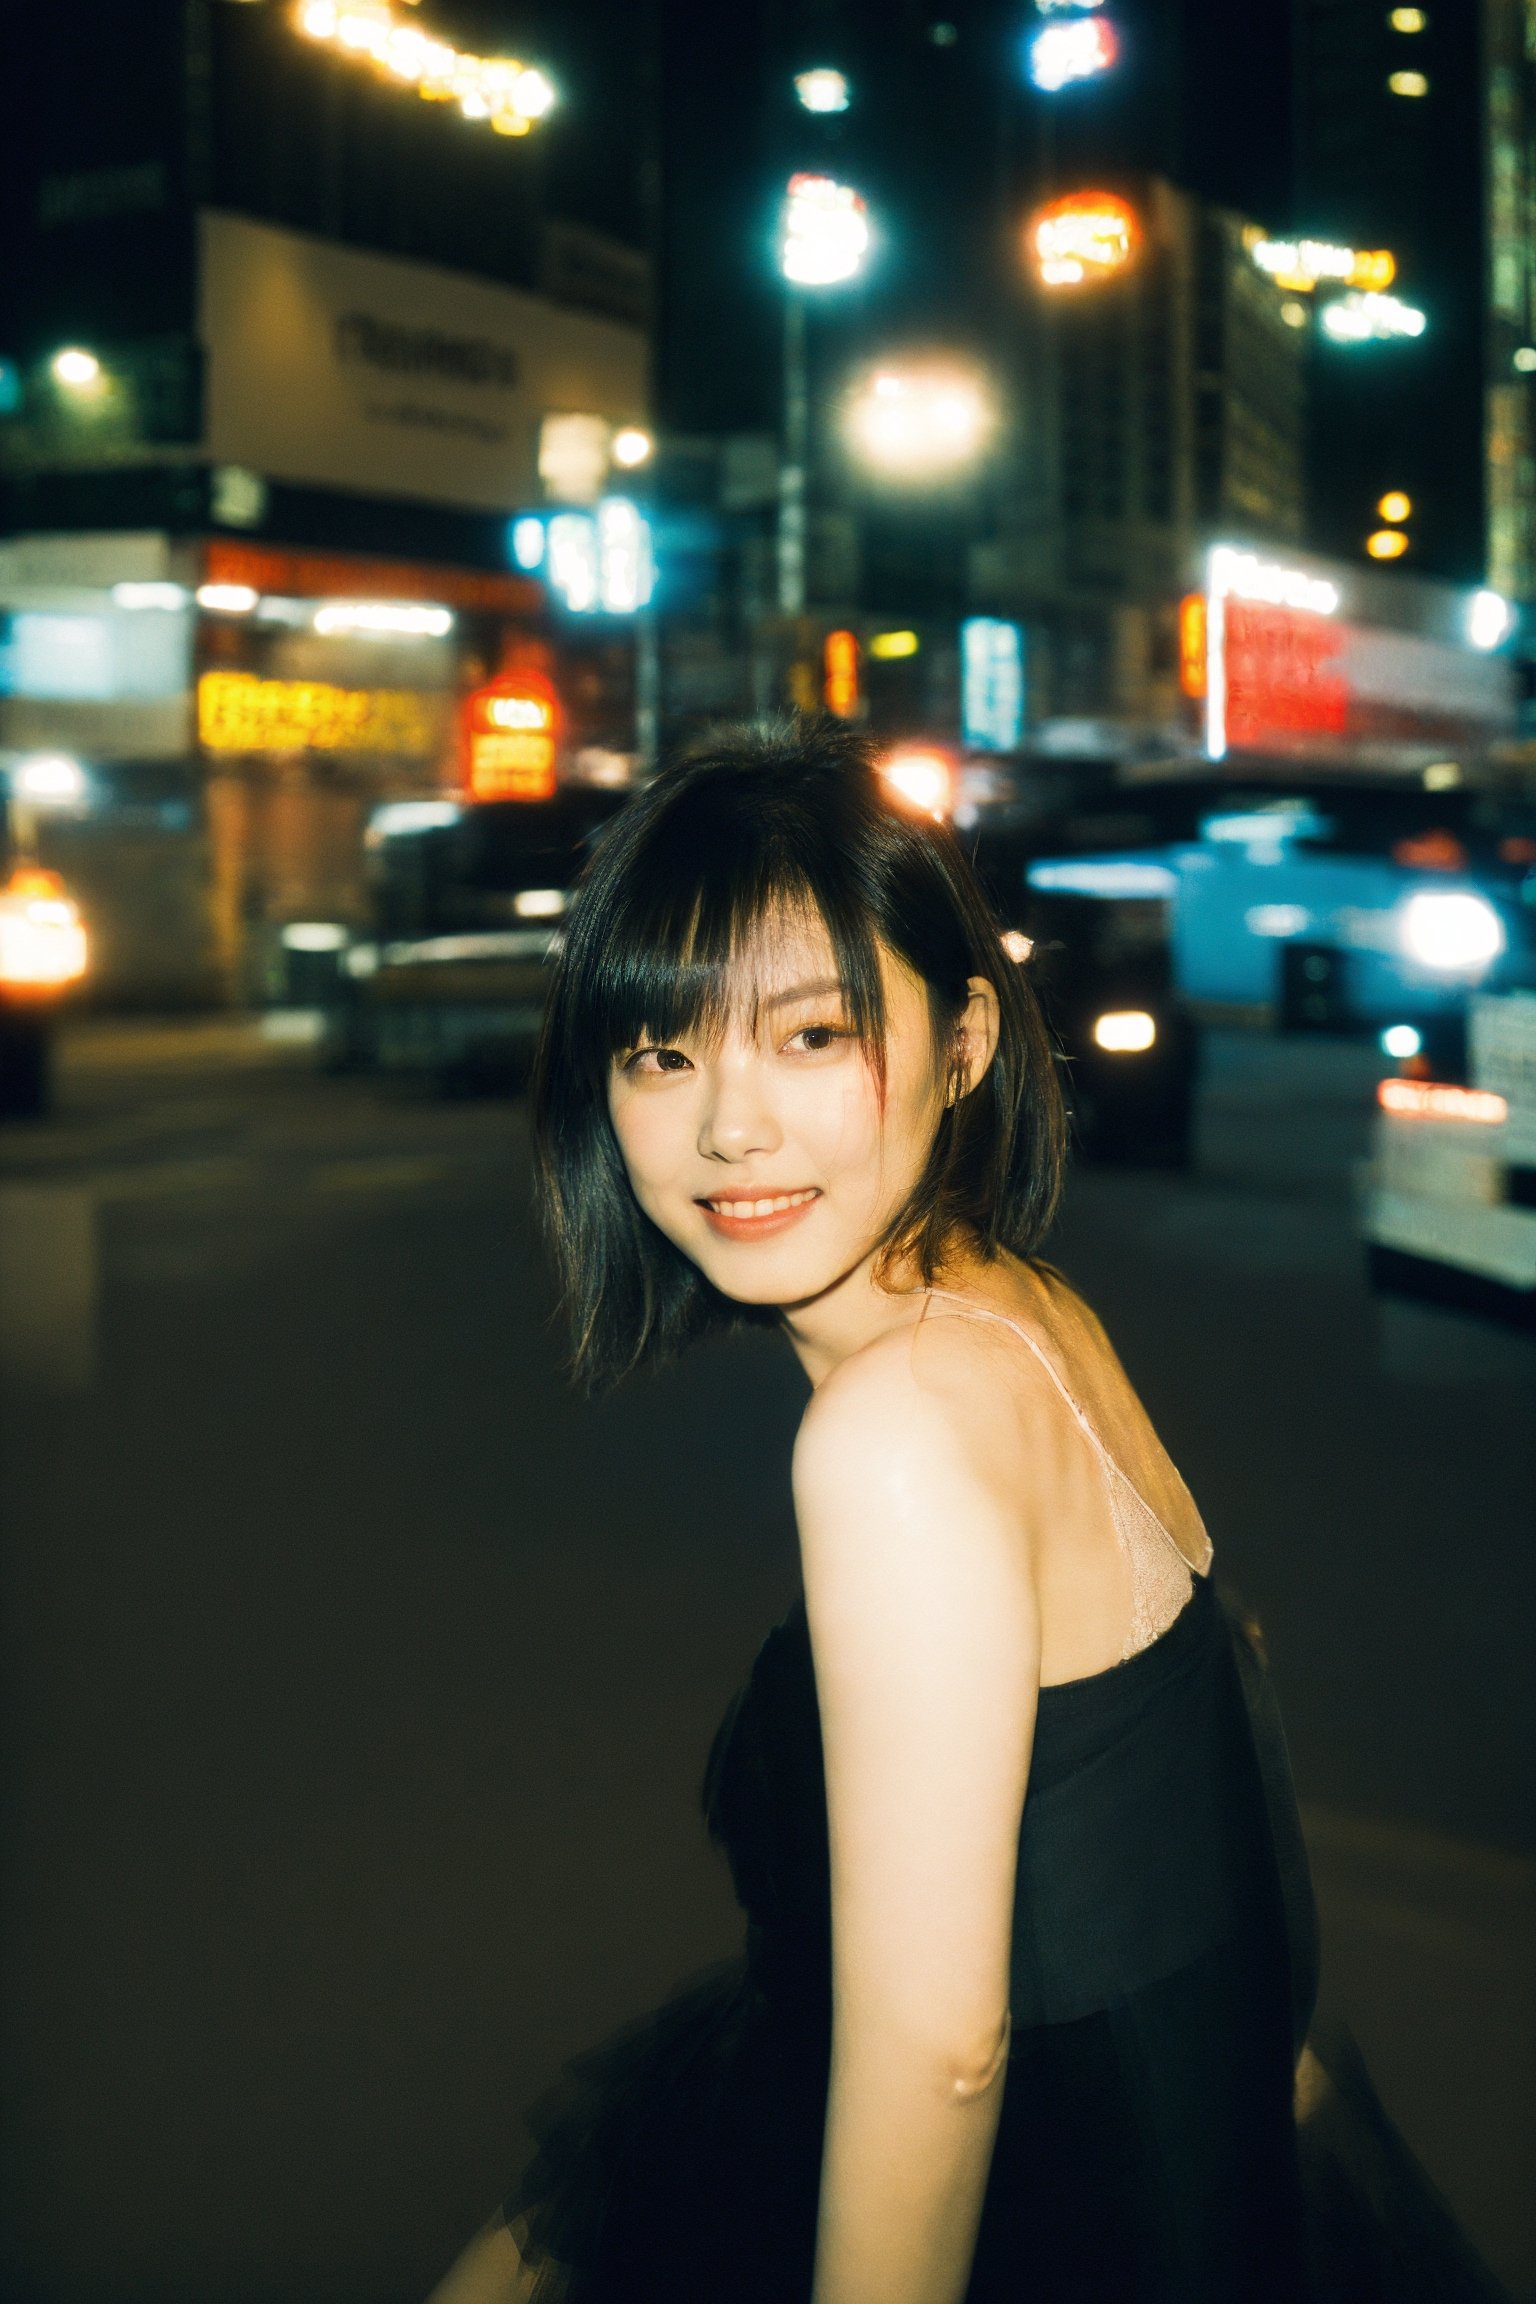 A 27-year-old Asian woman, noble, (((thin))), short hair, messy hair, Tulle Layered Tutu, necklace, 
Seductive Glance, High heels showcase, Sweet smile,
city, hong kong, Night, 
low key lighting, dutch angle, With Film Grain, Rule of Thirds, 